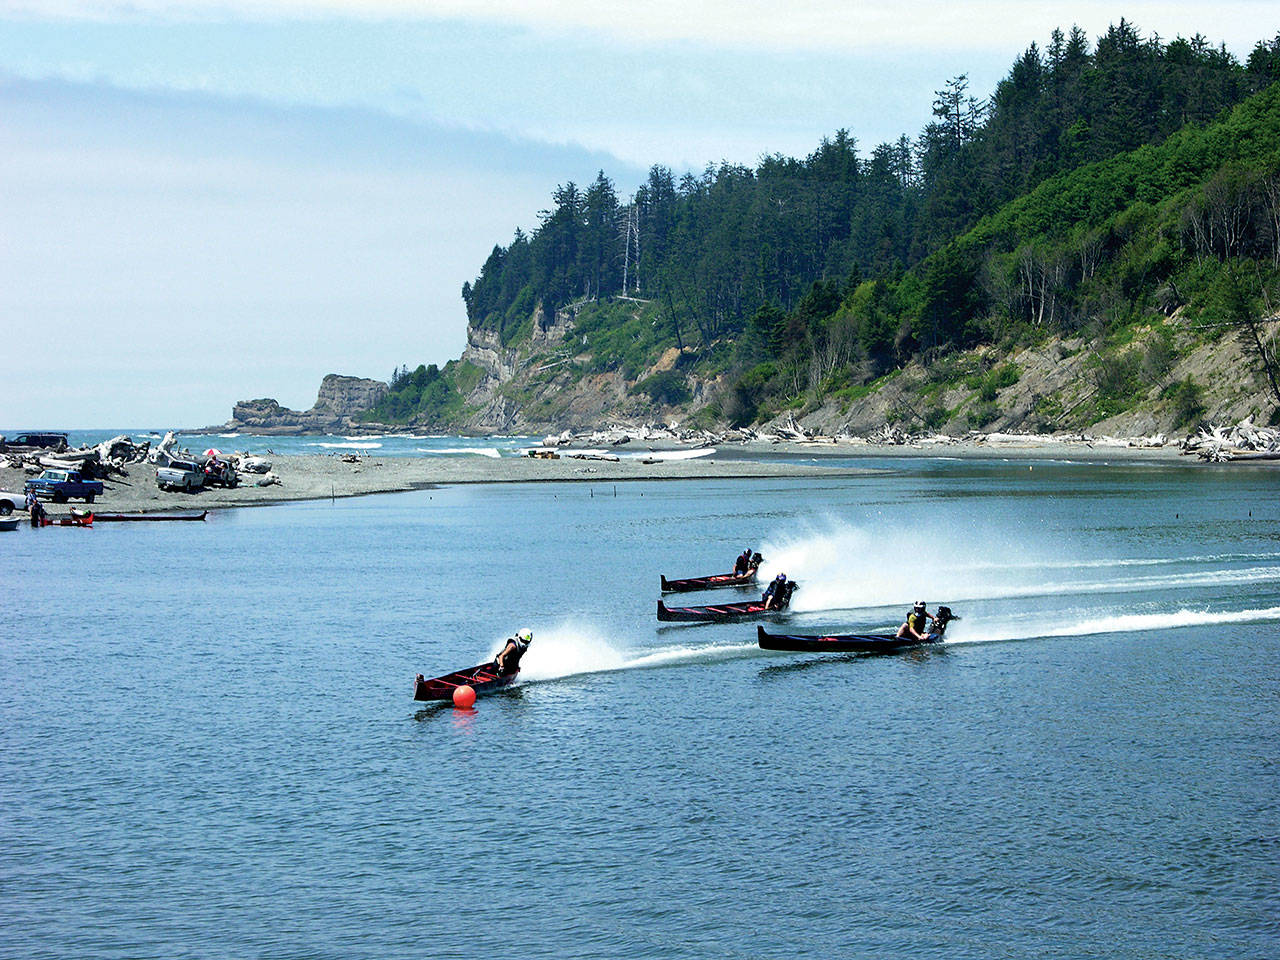 Larry Workman photo: Canoes race at the mouth of the Quinault River during Chief Taholah Day competition.